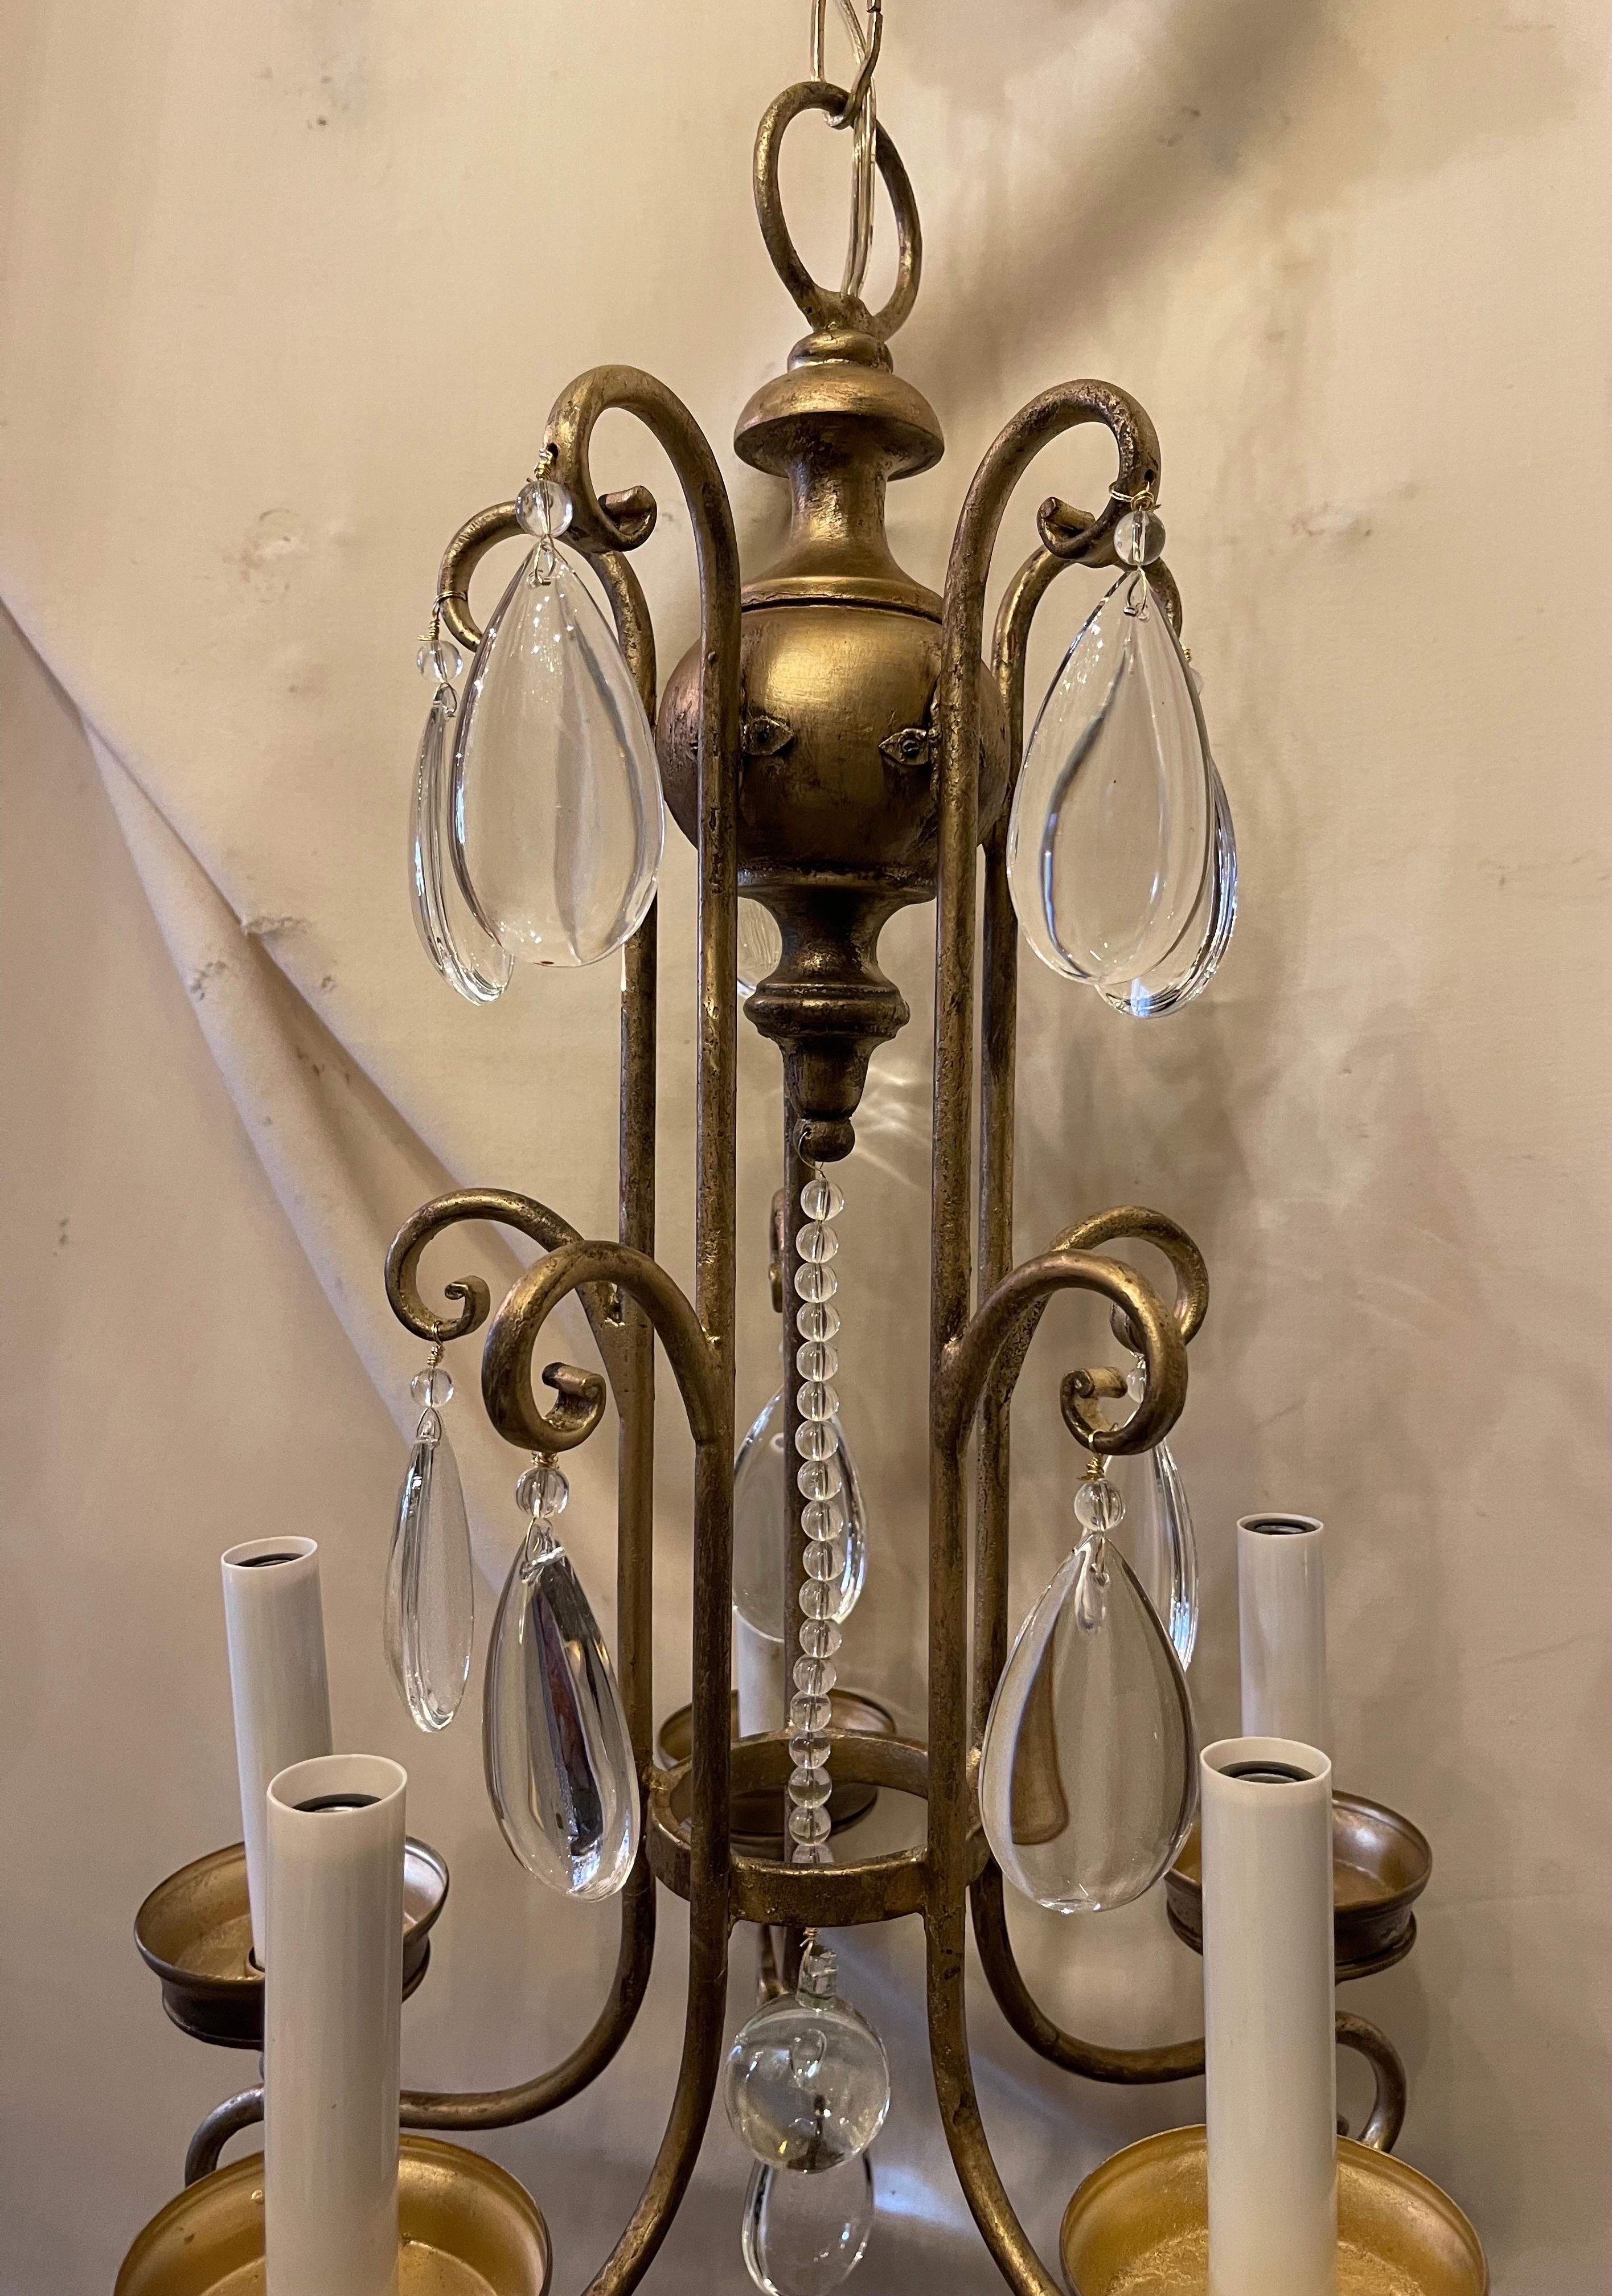 A Wonderful Mid Century Modern Maison Bagues Style Gold Gilt & Crystal Petite 5 Candelabra Light Fixture, This Chandelier Has Been Rewired And Comes With Chain And Canopy